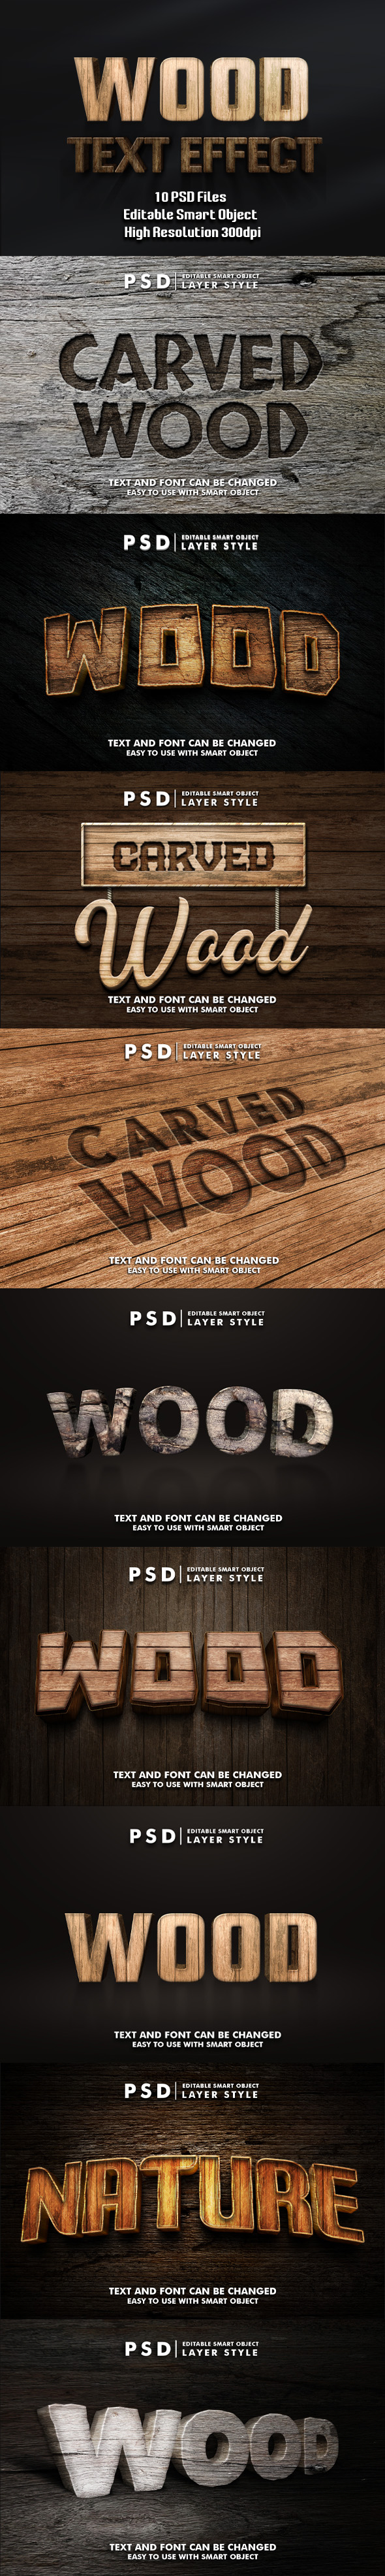 [DOWNLOAD]The Best of Wood Psd Text Effect